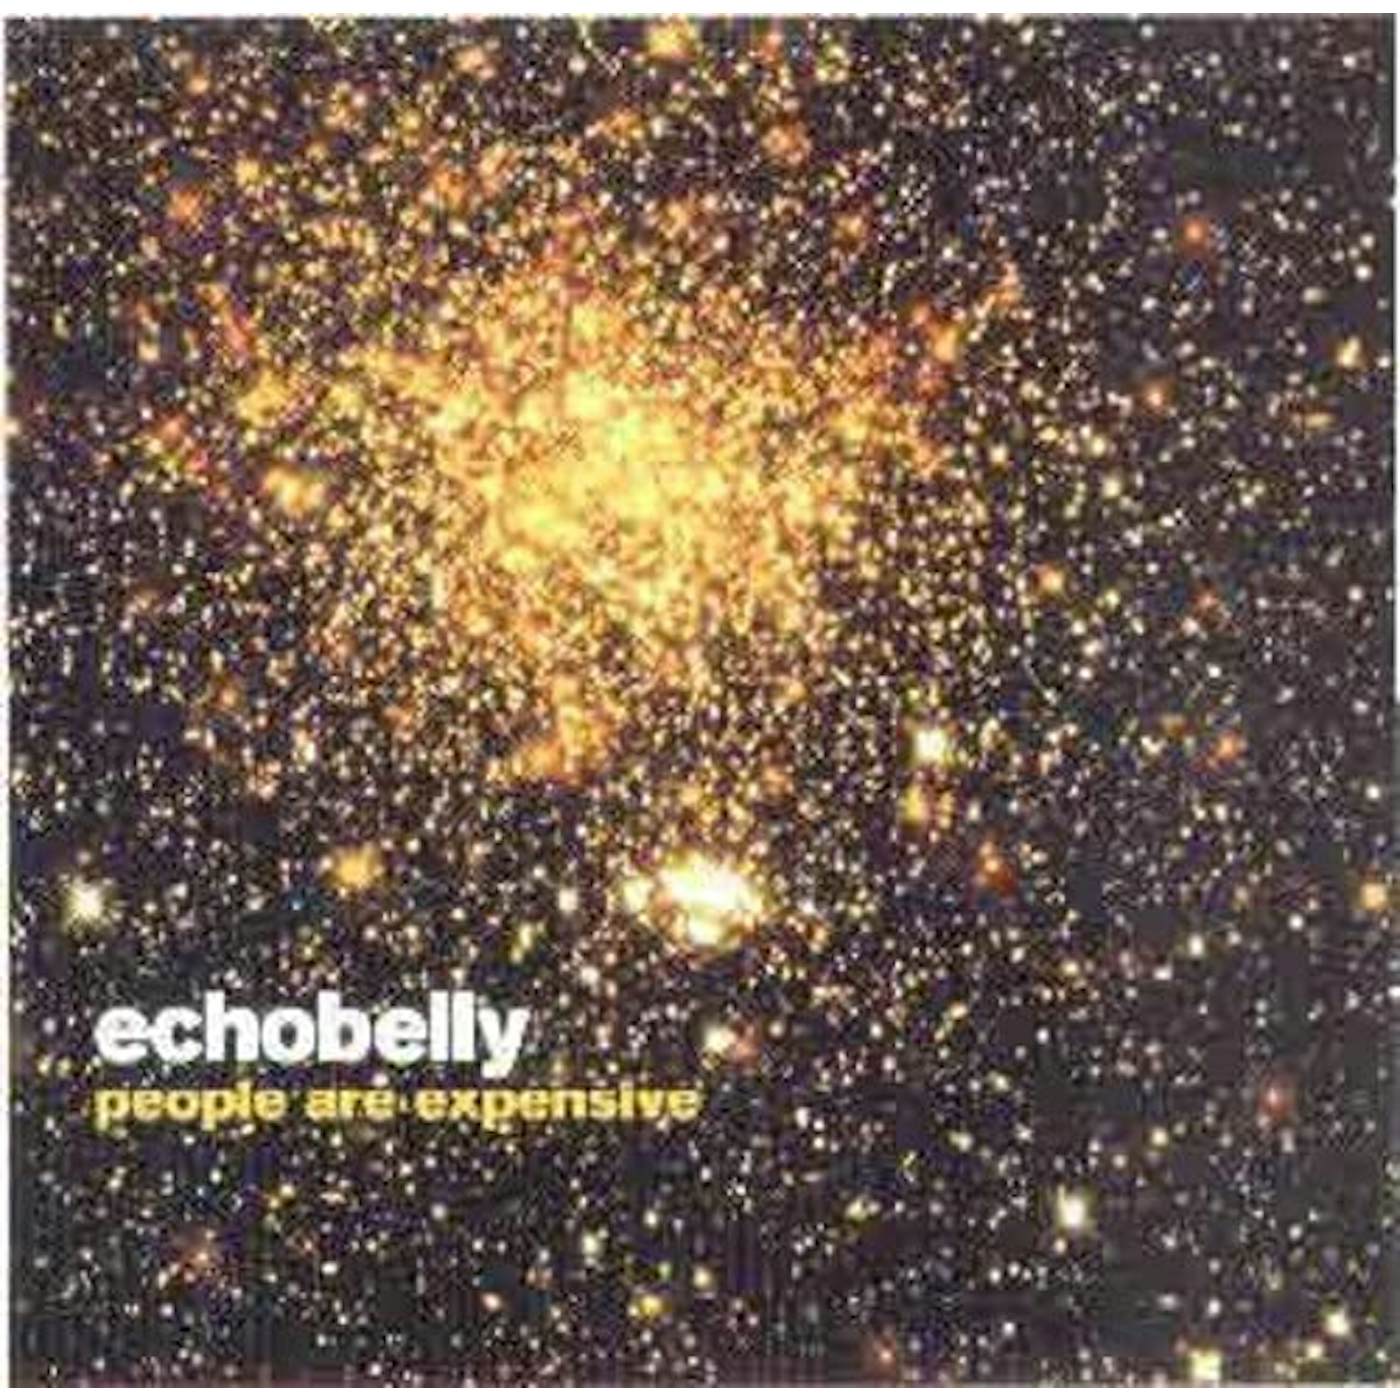 Echobelly People Are Expensive Vinyl Record